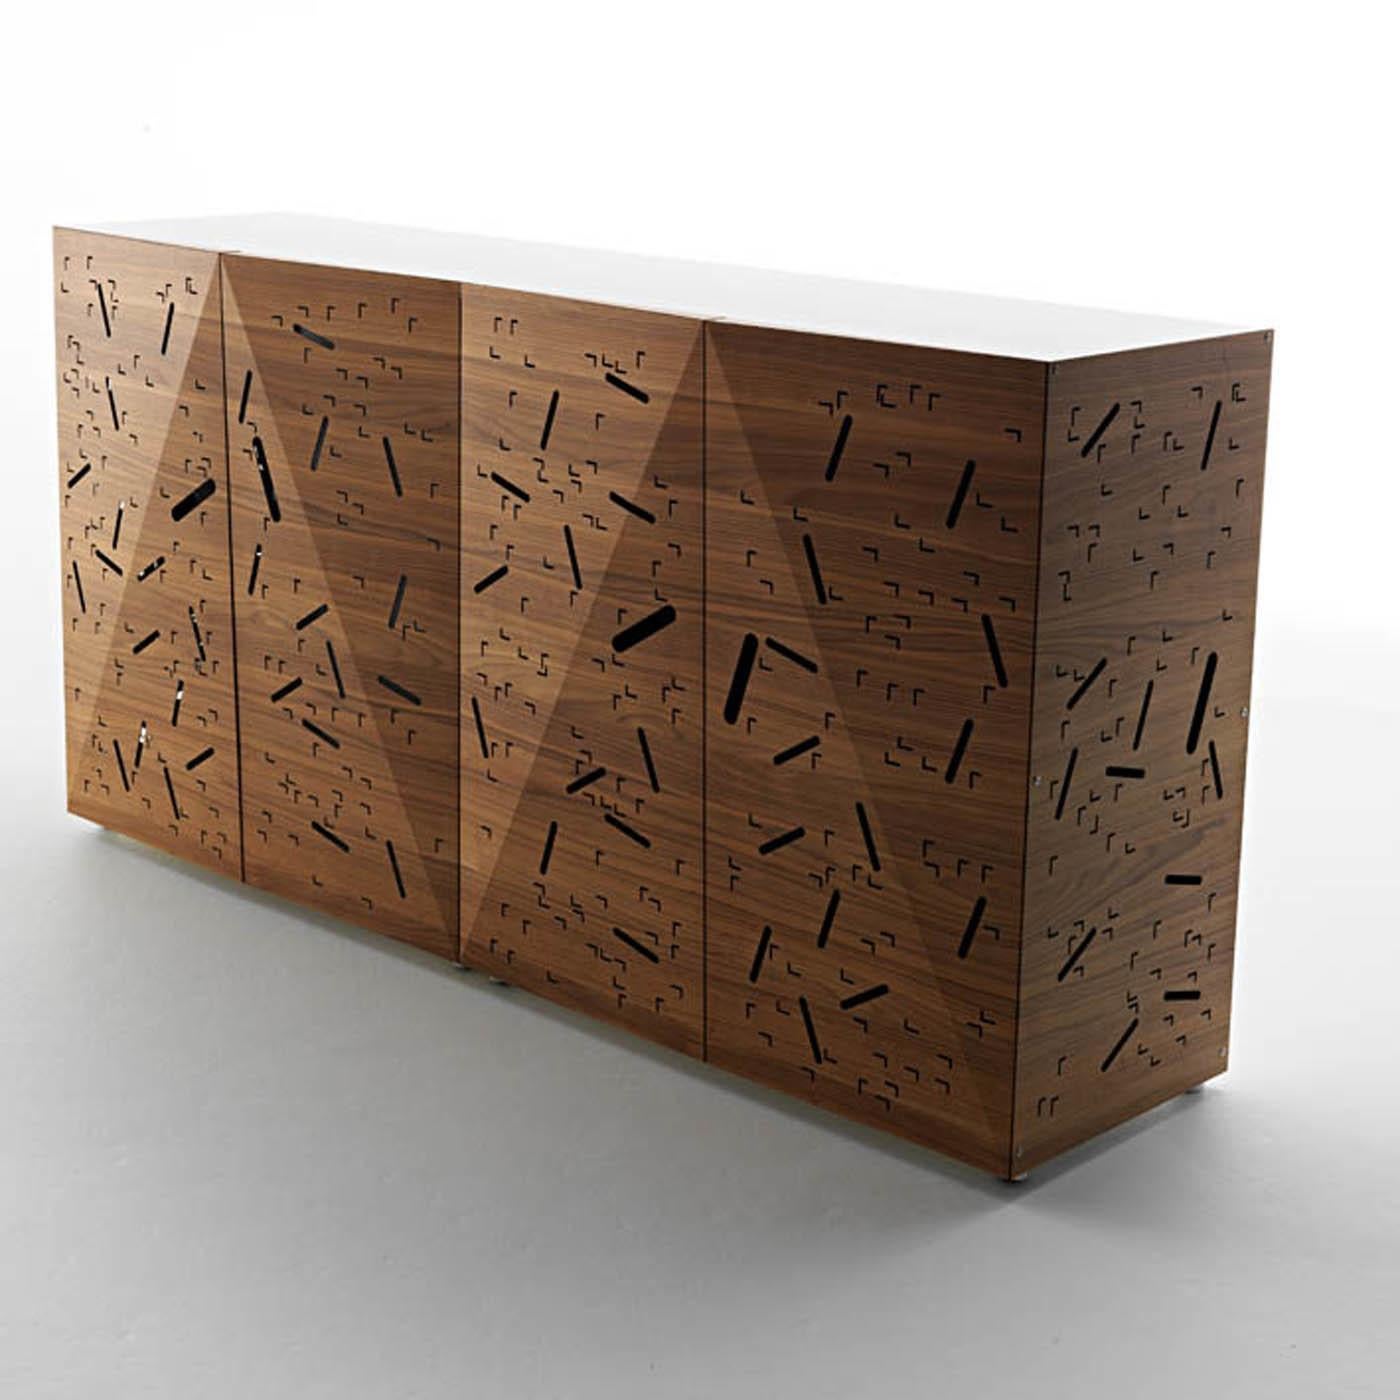 An example of advanced technology designed by Steven Holl, the distinctive and spectacular element of this sideboard is its thin, wooden door boasting a laser-cut fretwork that radiates the internal LED lights (input 100-240V -Europlug CEE 7/16)